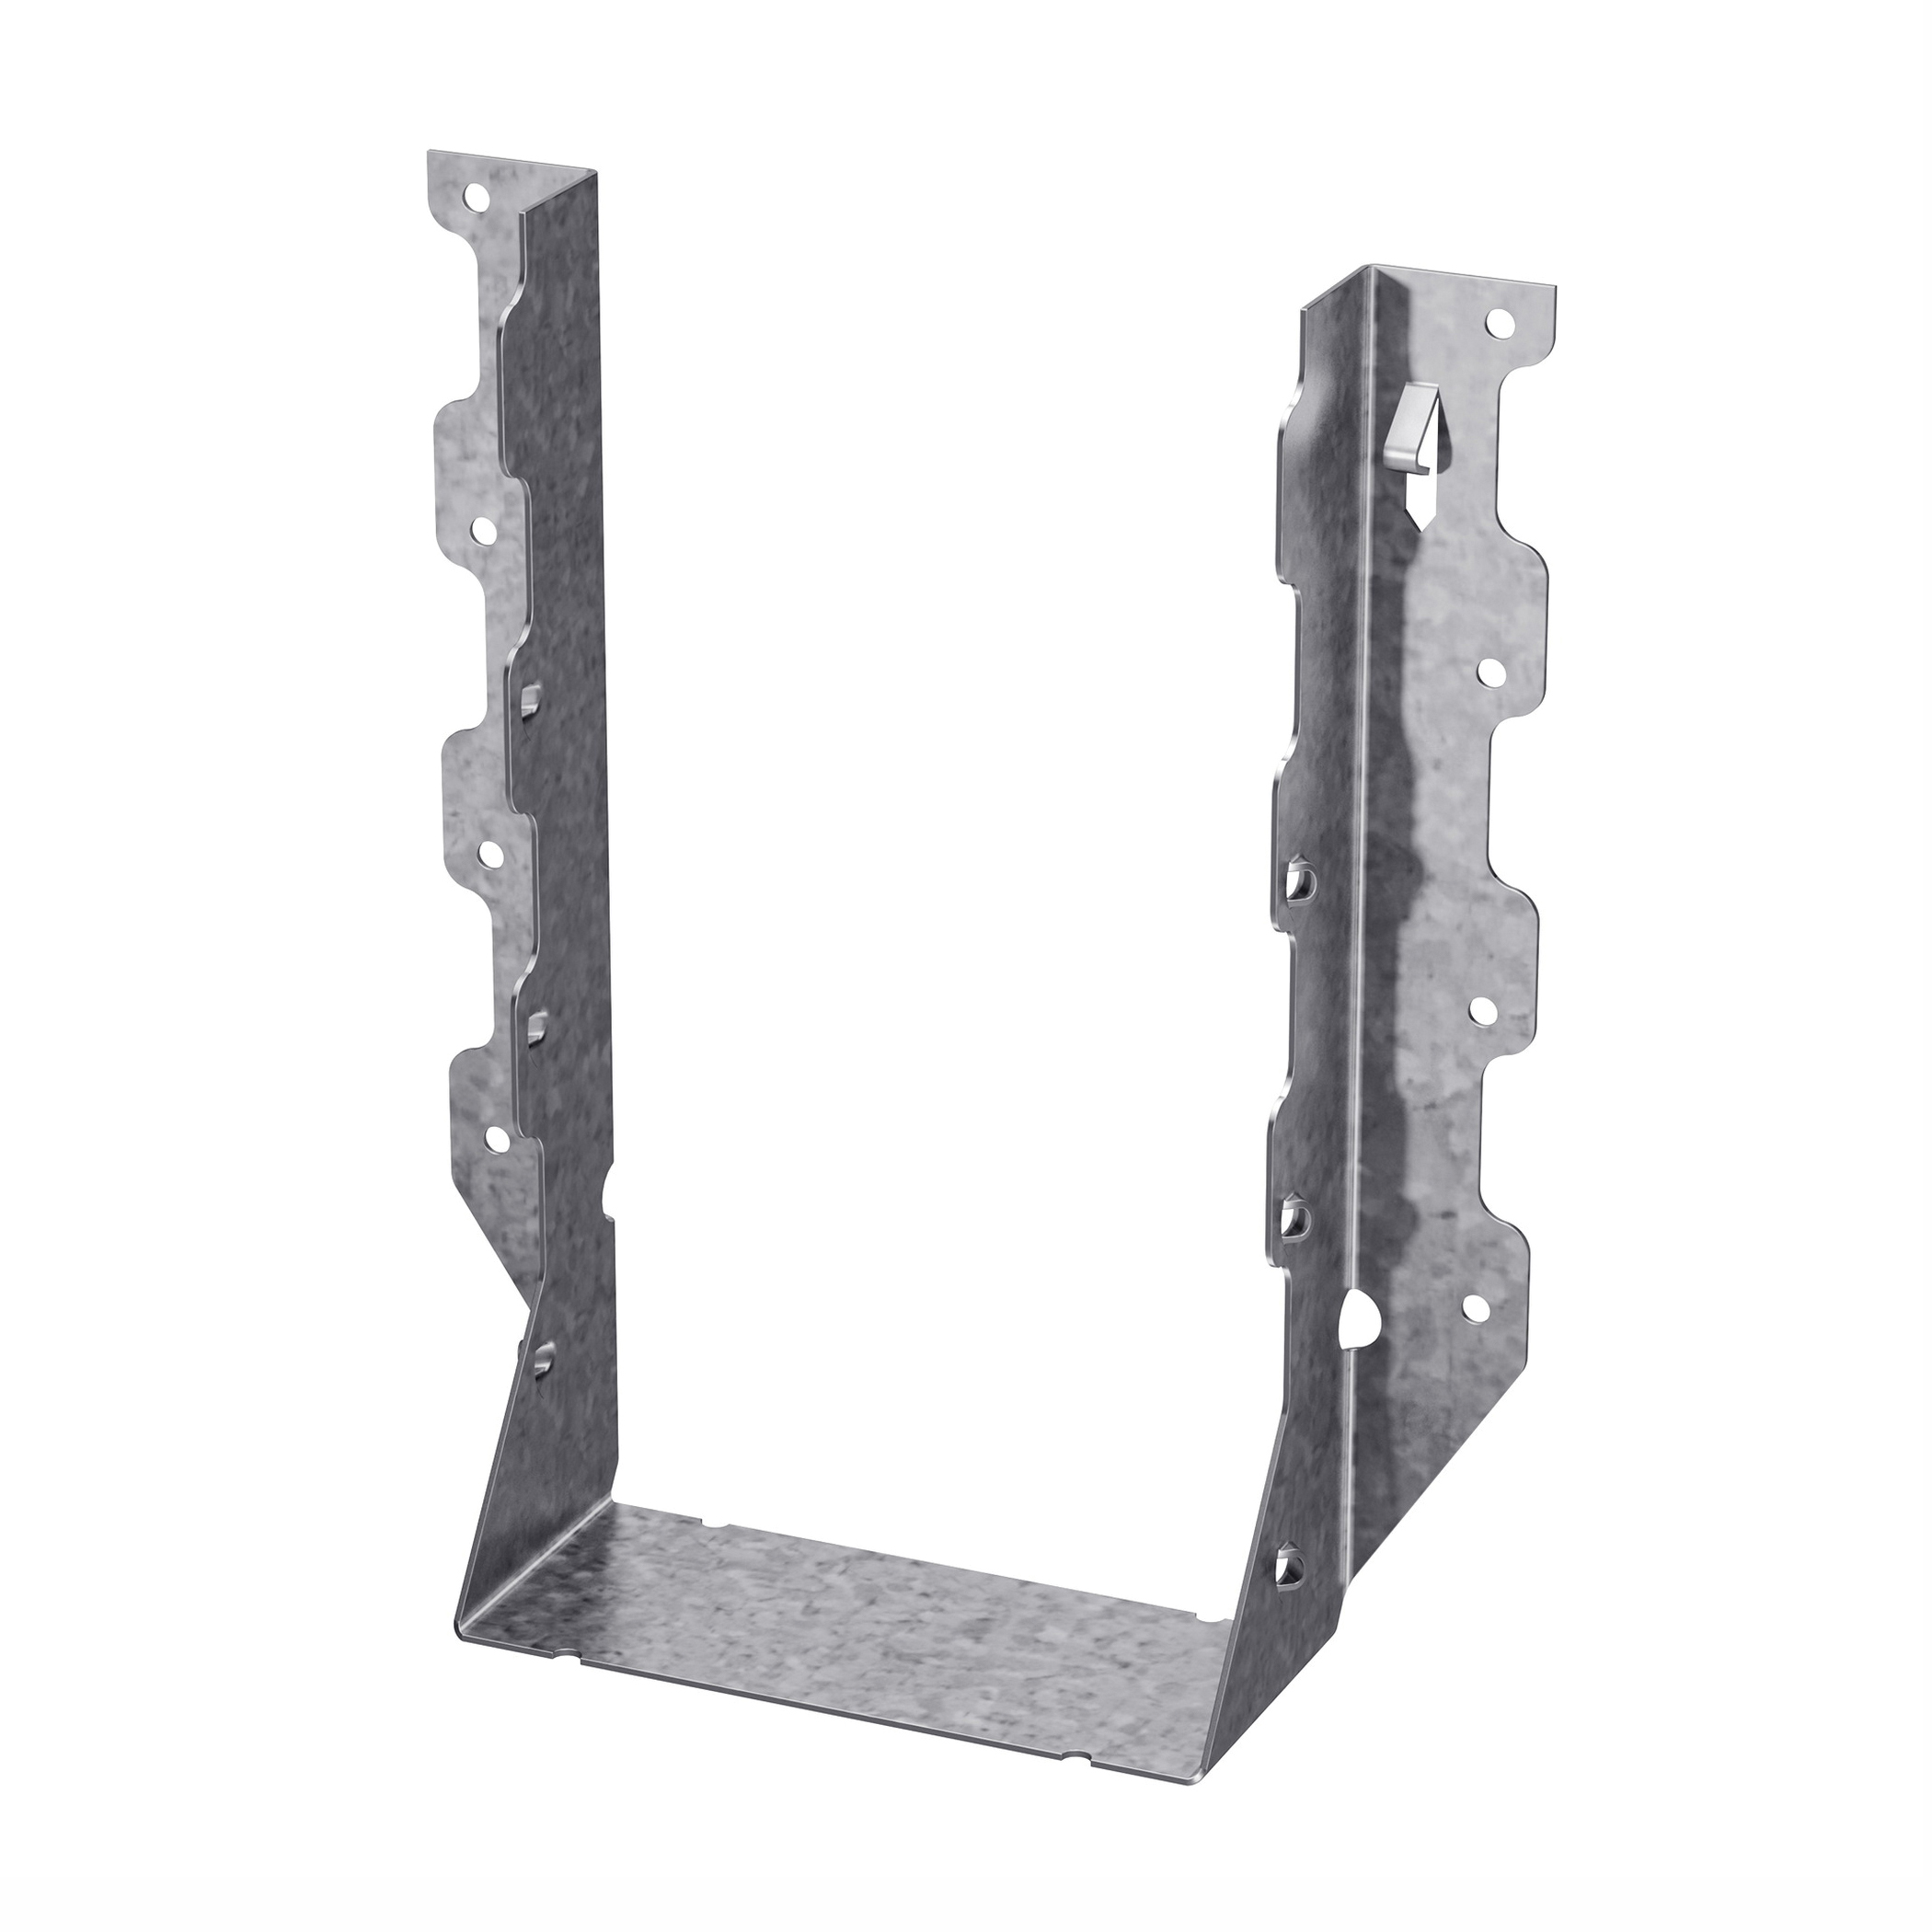 LUS Series LUS210-3 Joist Hanger, 8-13/16 in H, 2 in D, 4-5/8 in W, Steel, Galvanized, Face Mounting